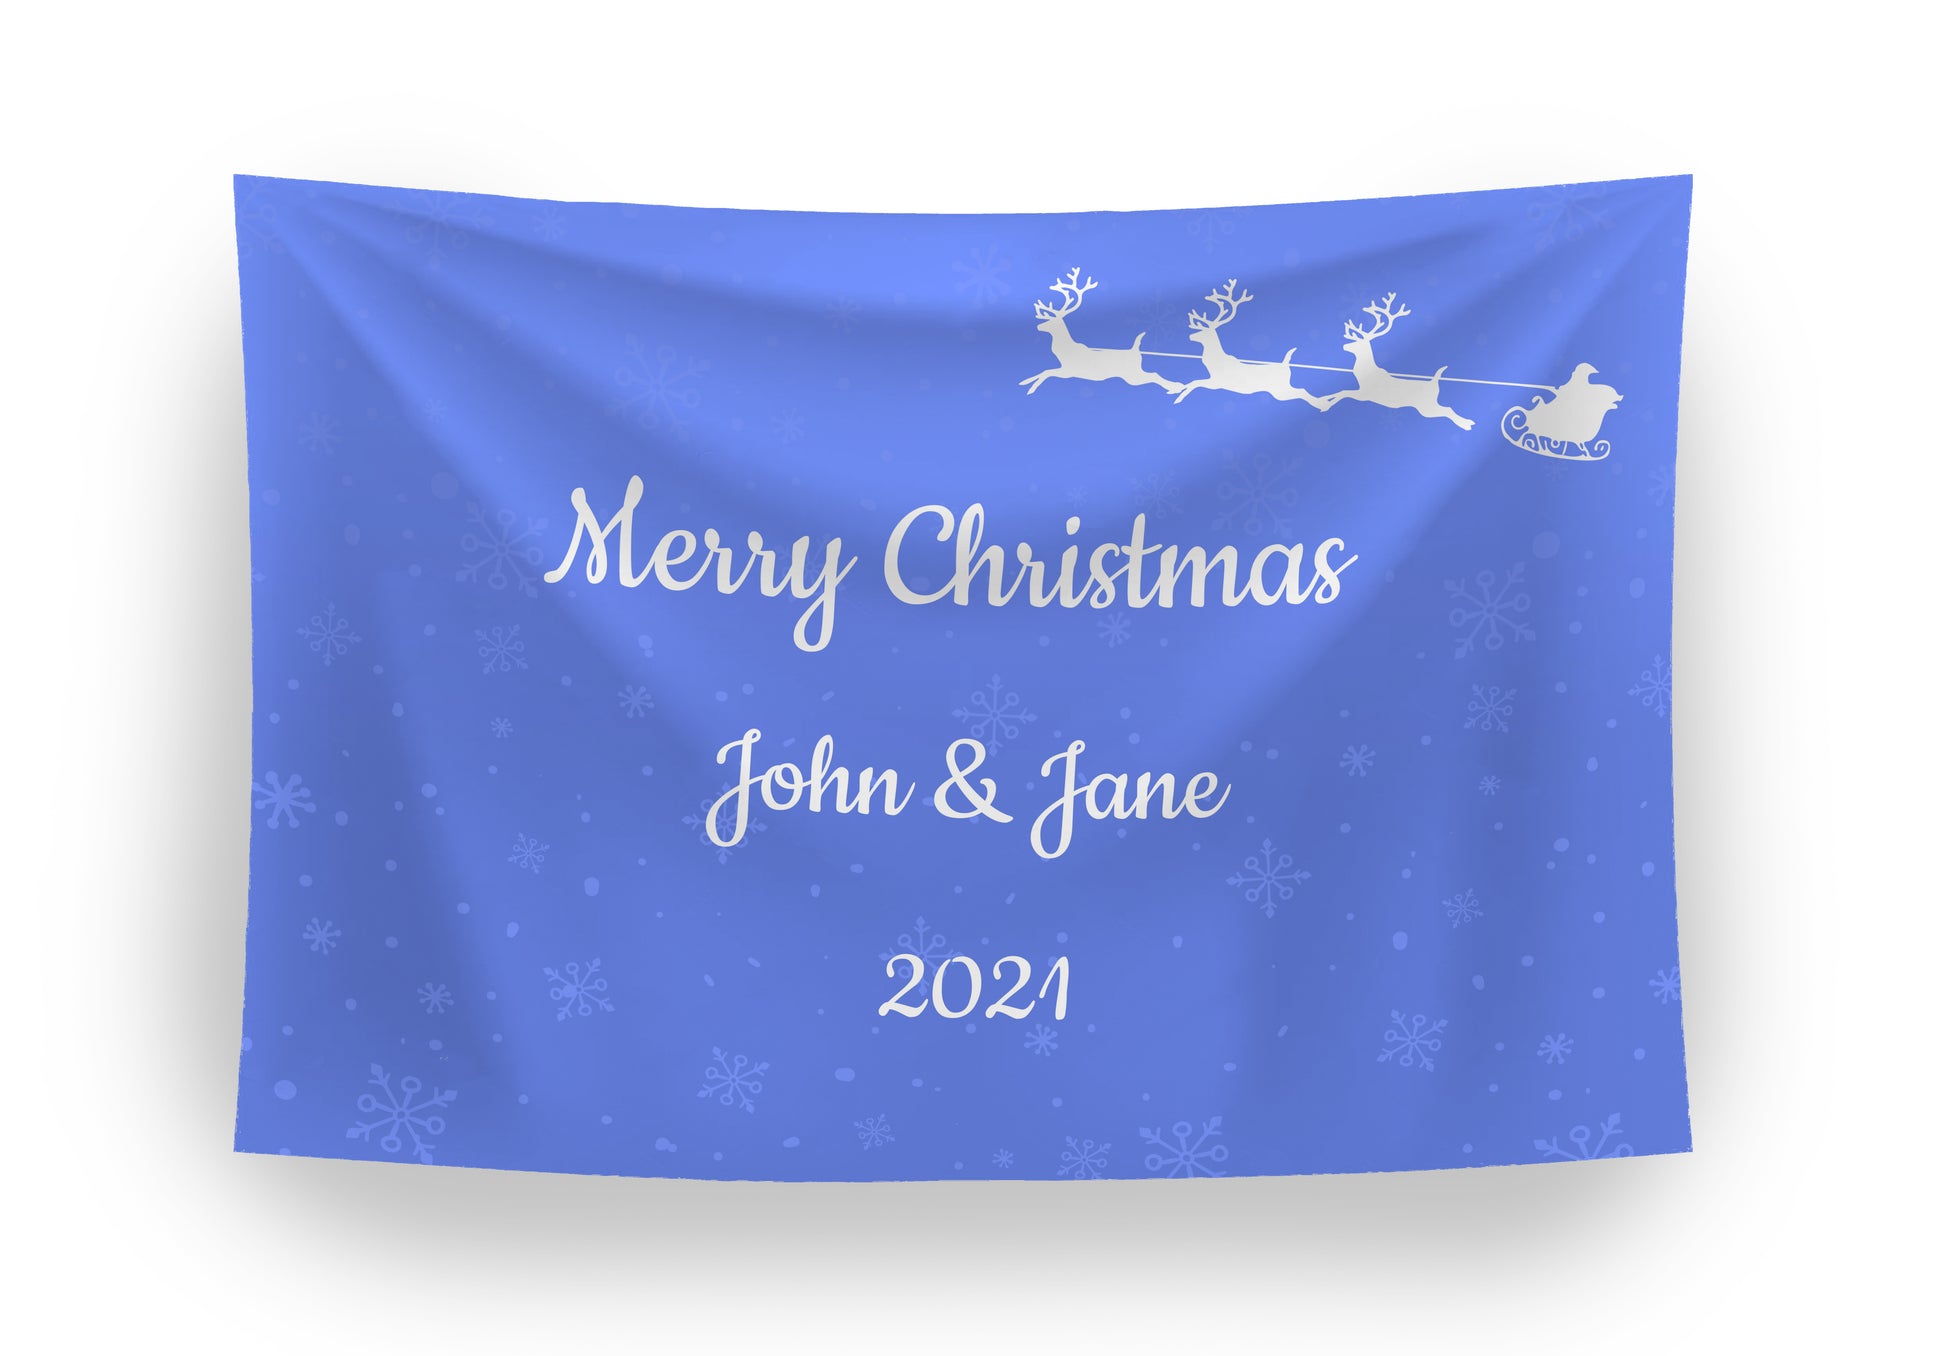 Personalised Christmas Banner. Blue Background and Snowflakes. Added Text Merry Christmas, and Names and Year. Santa Sleigh and Reindeers.